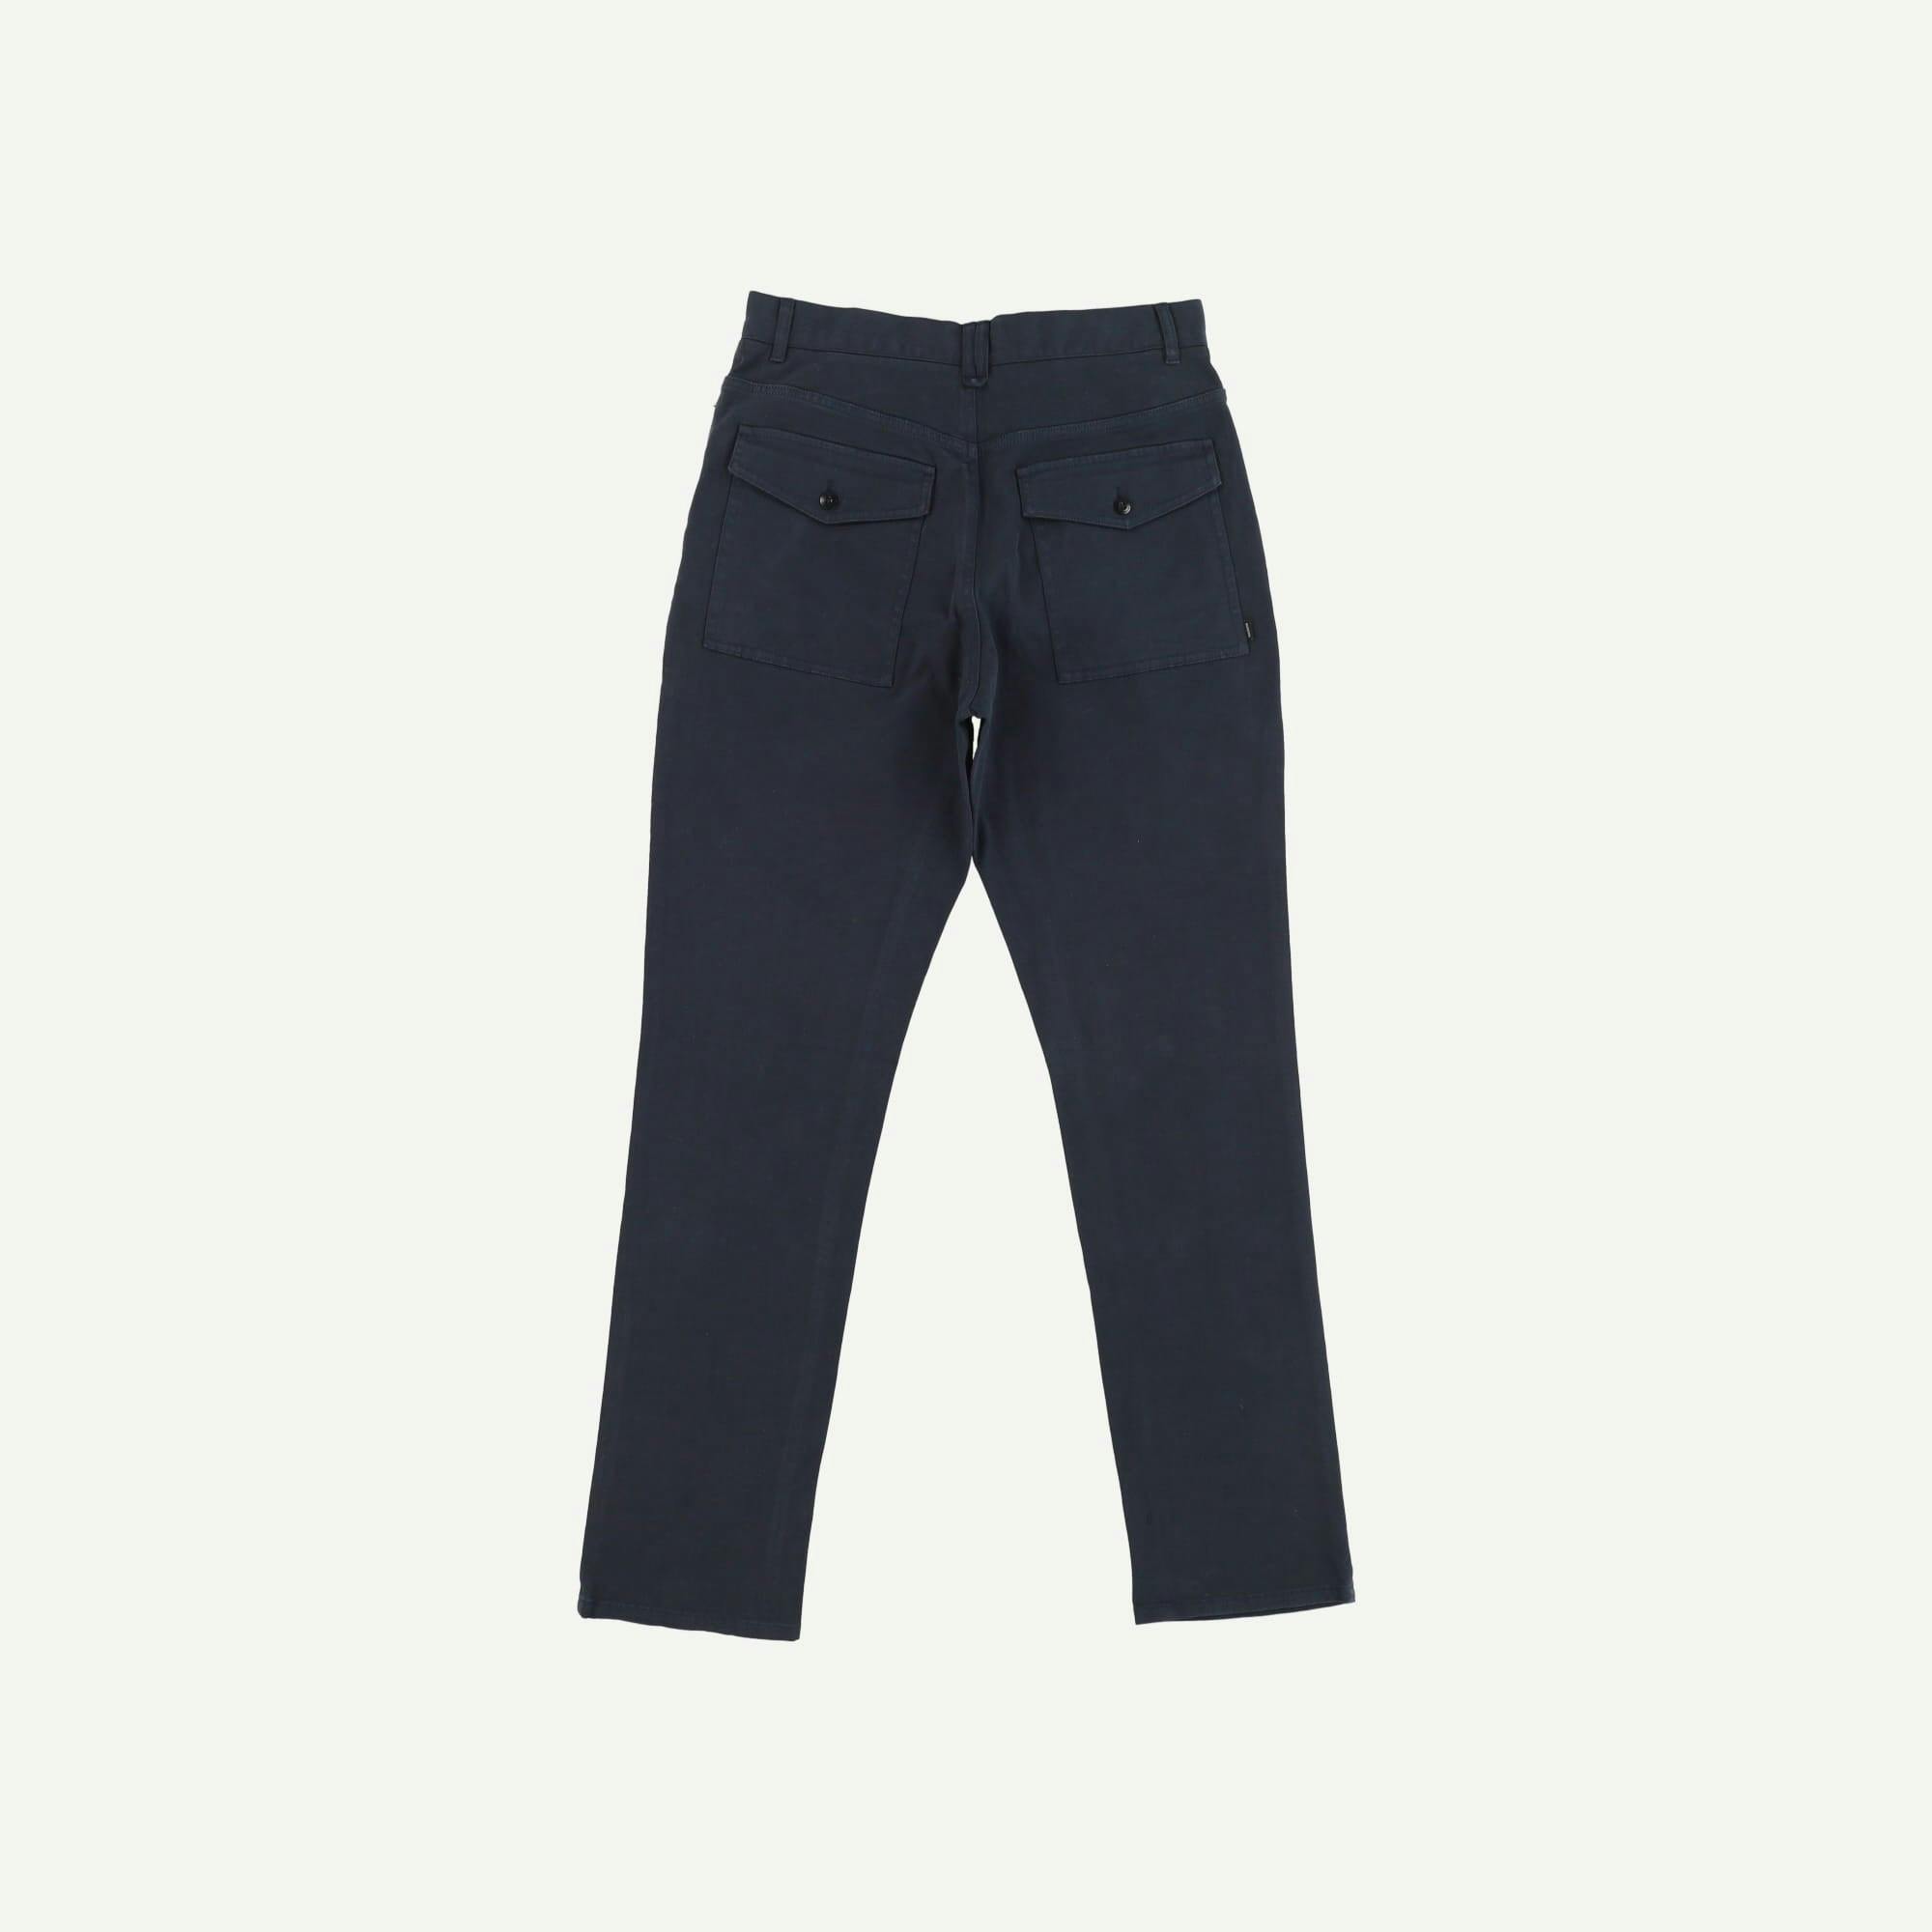 Finisterre Repaired Navy Trousers